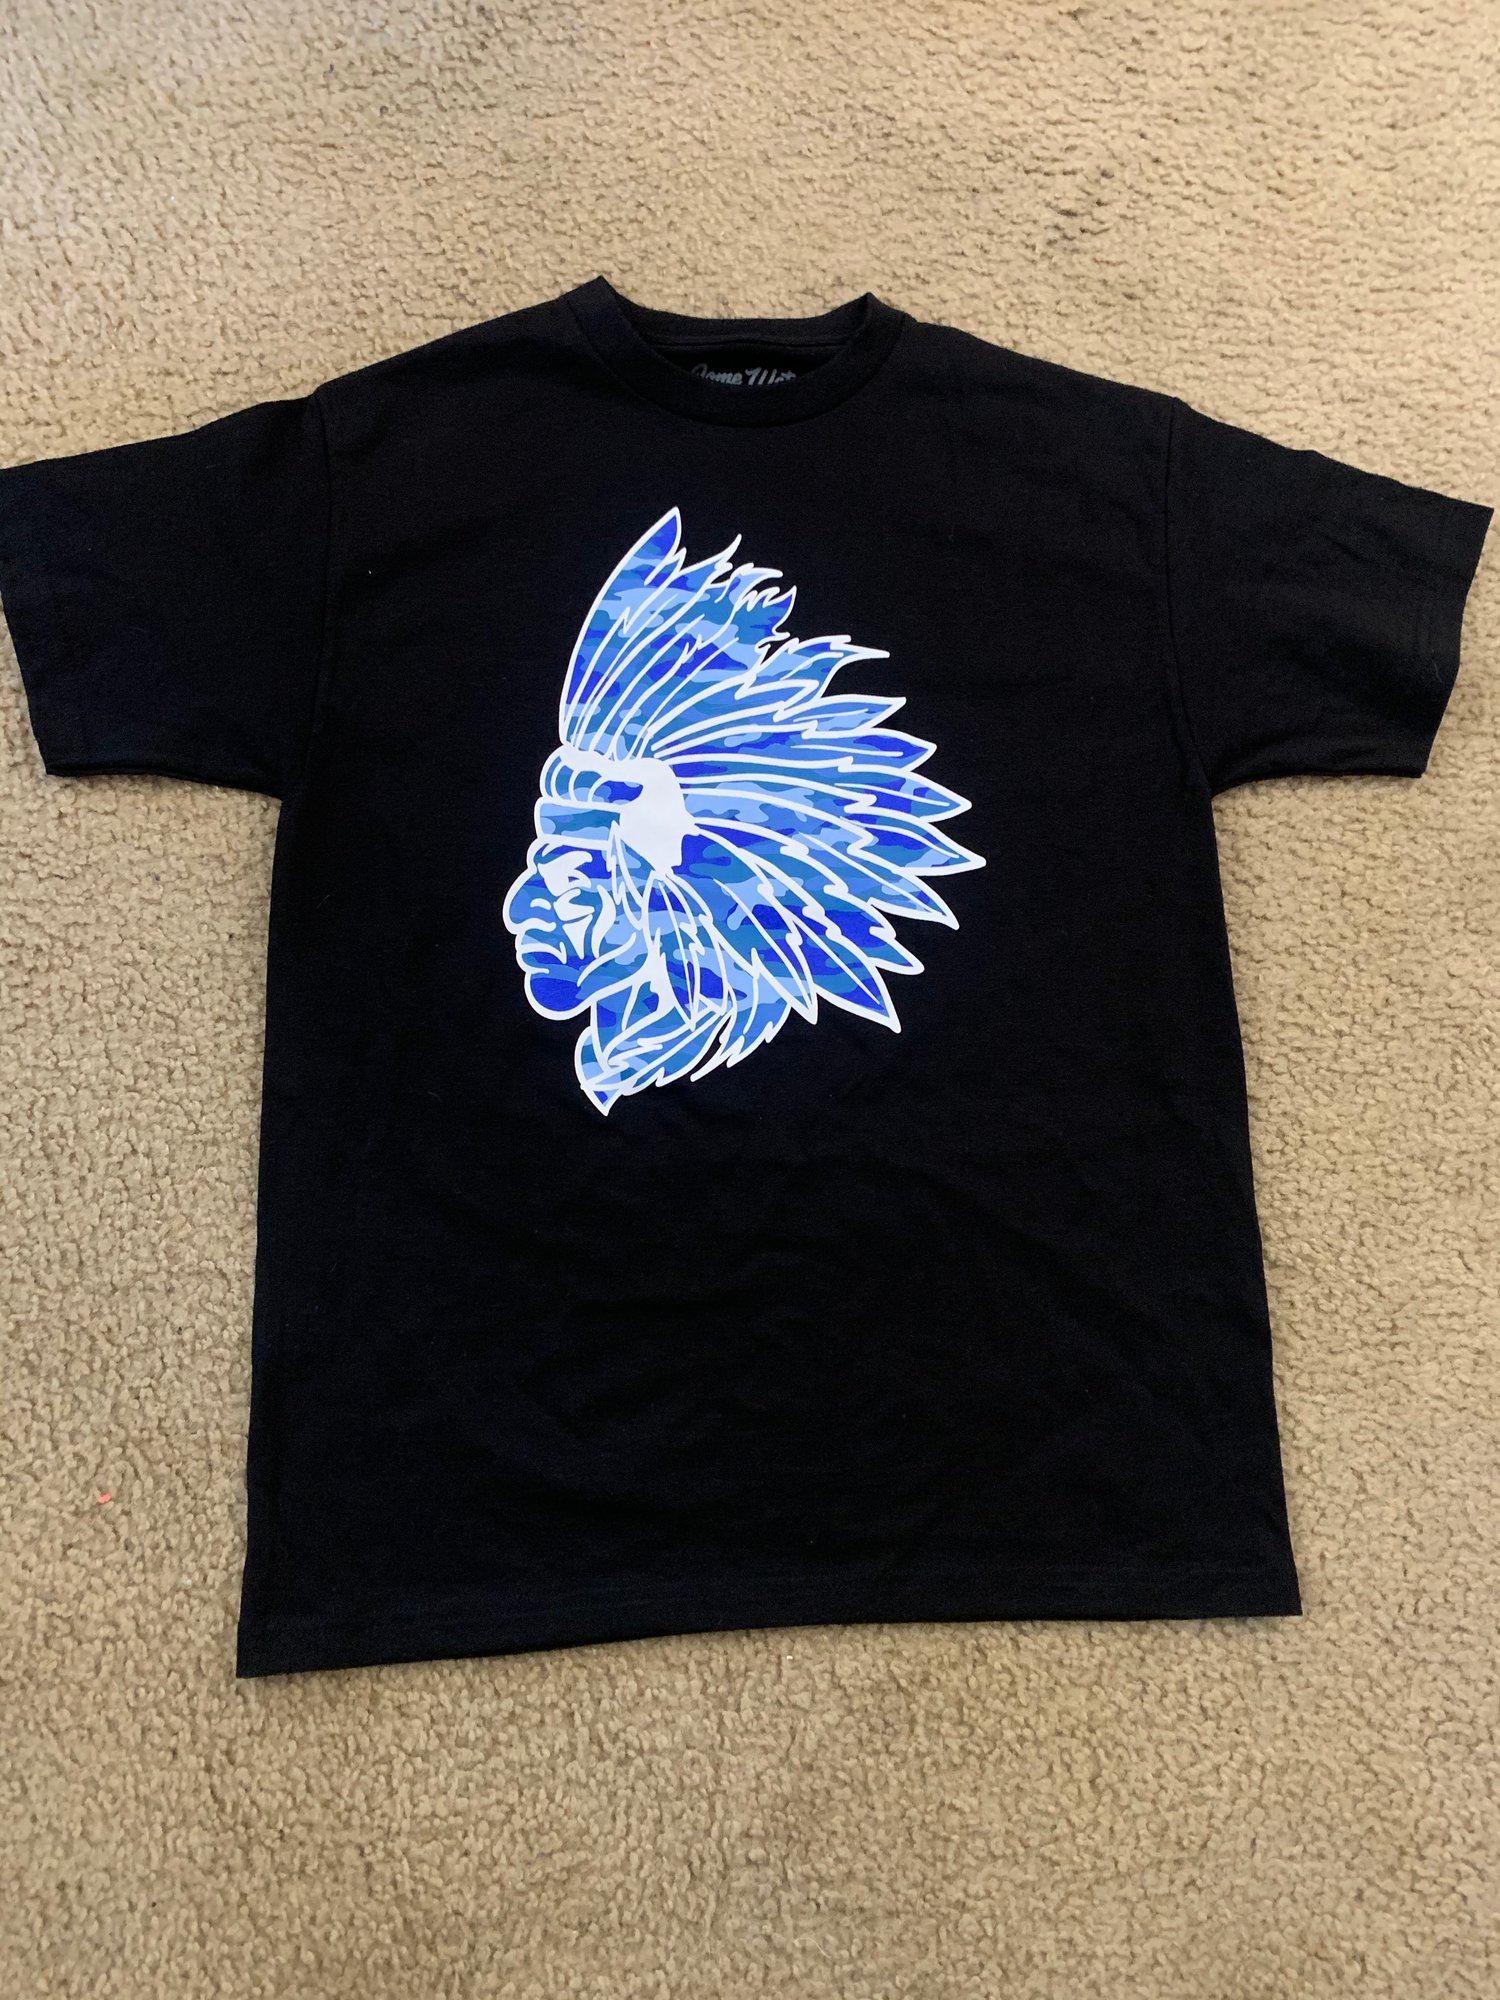 Image of Black and Blue logo tee